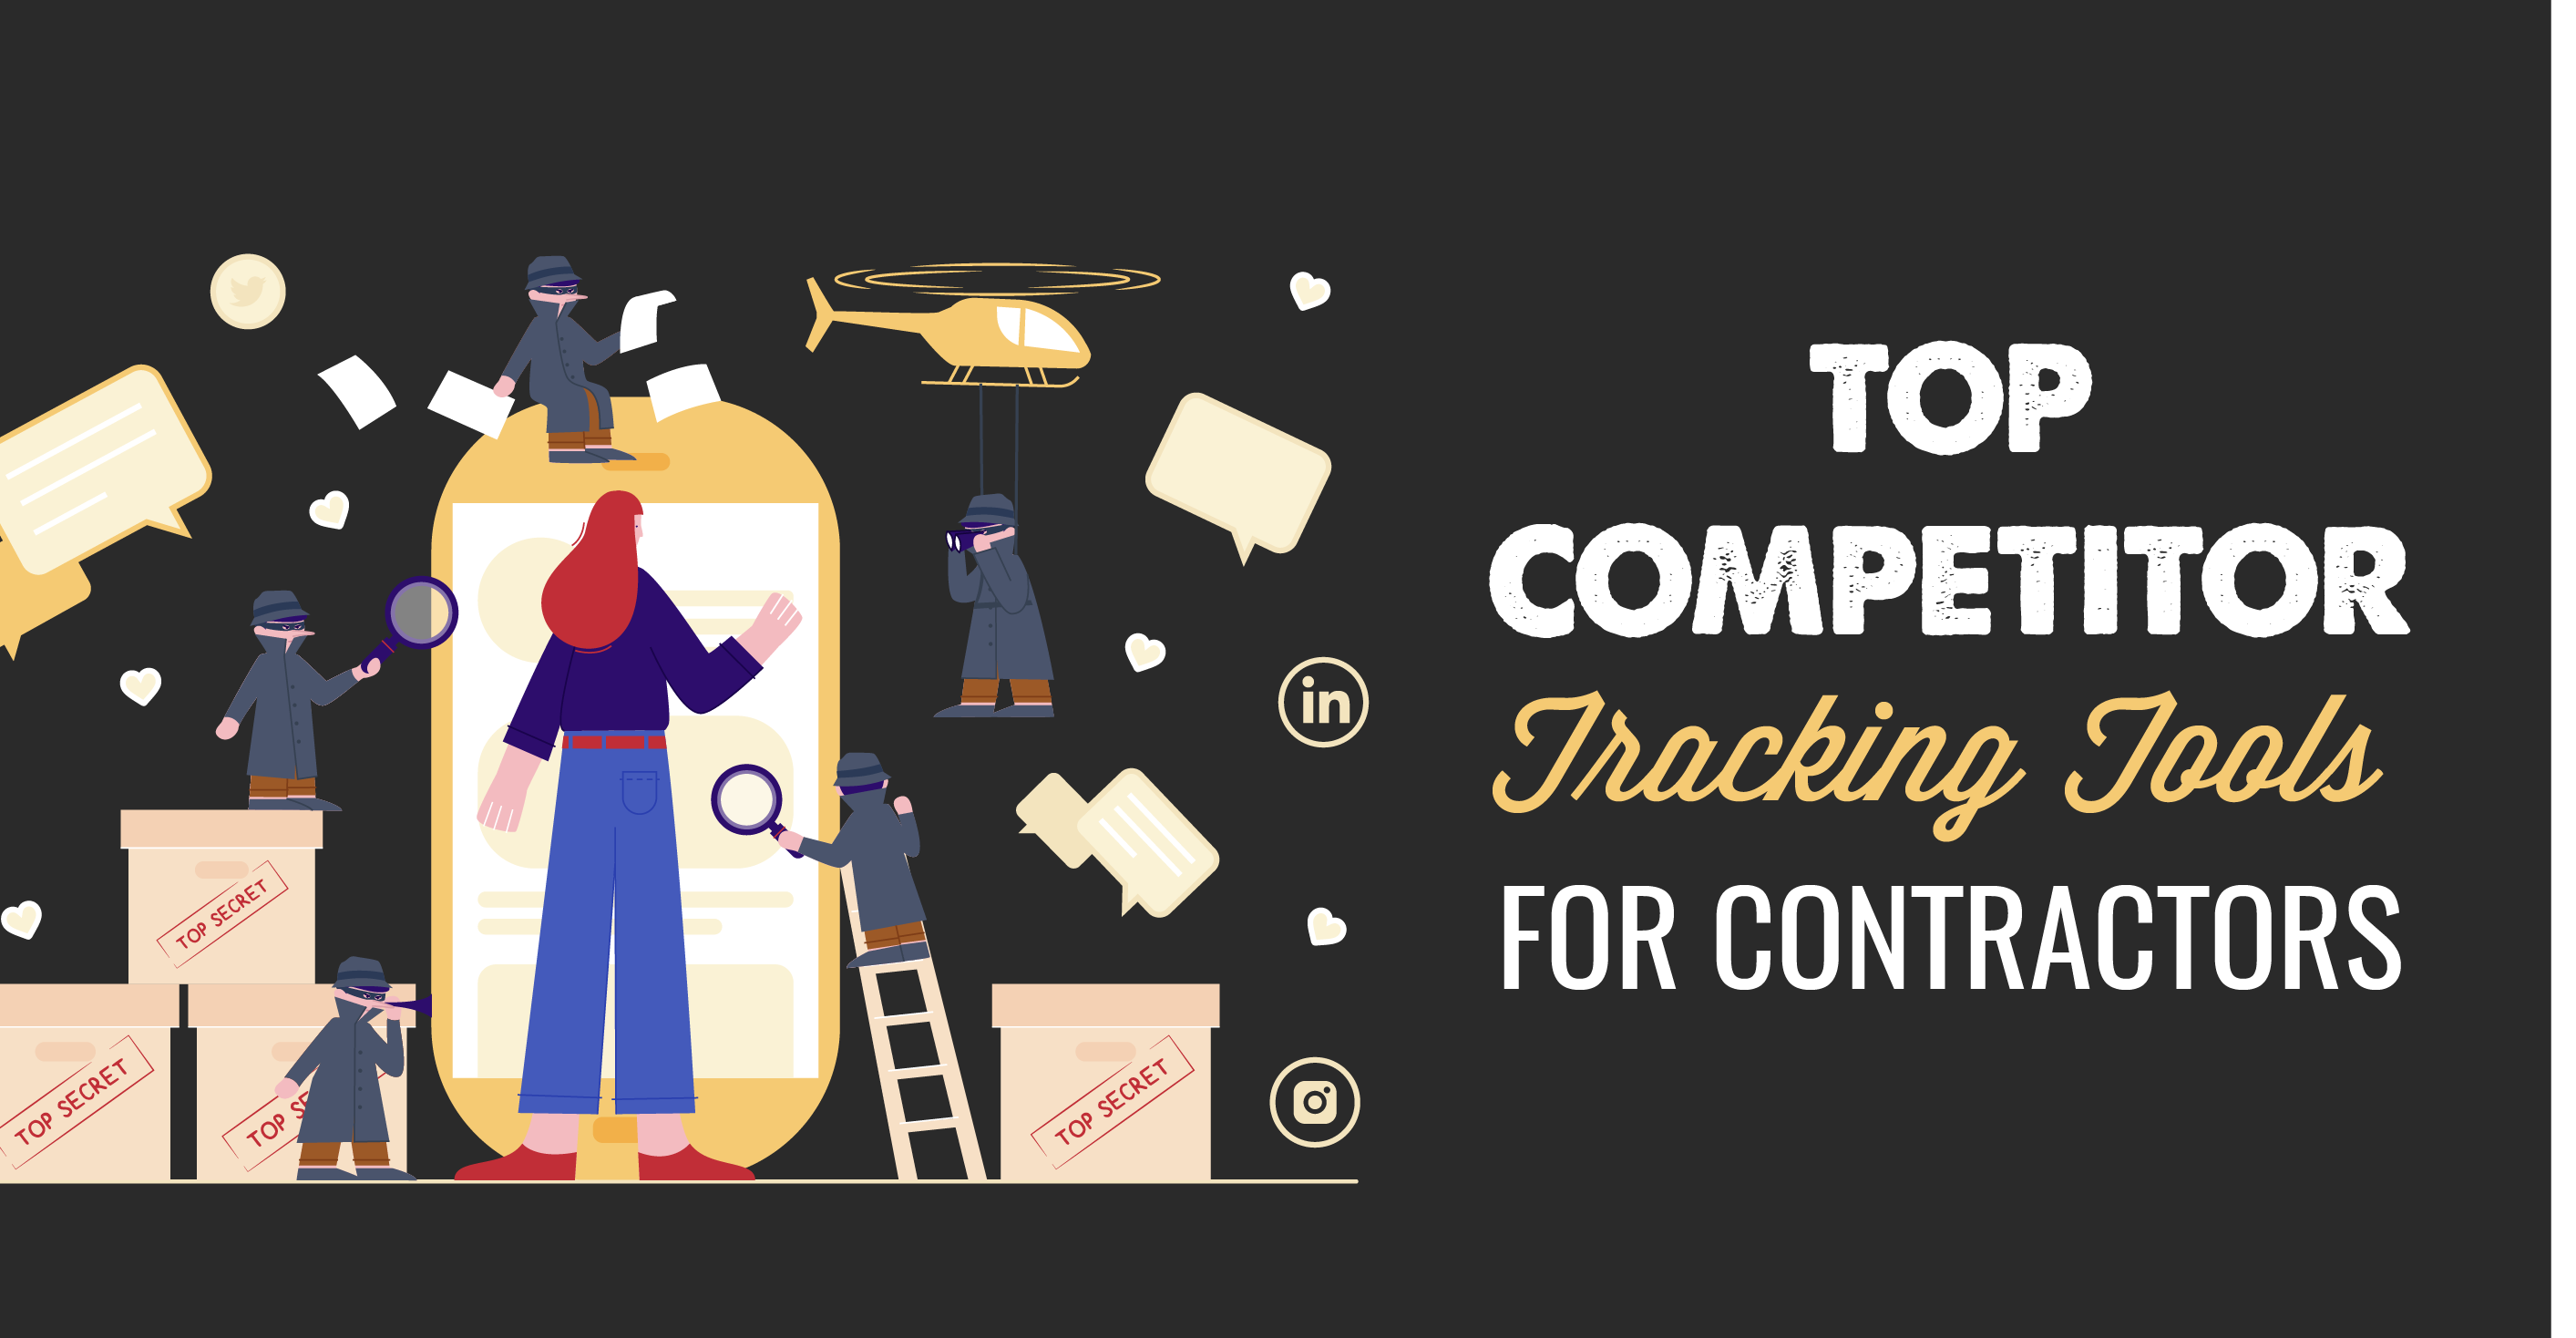 top competitor tracking tools for contractors